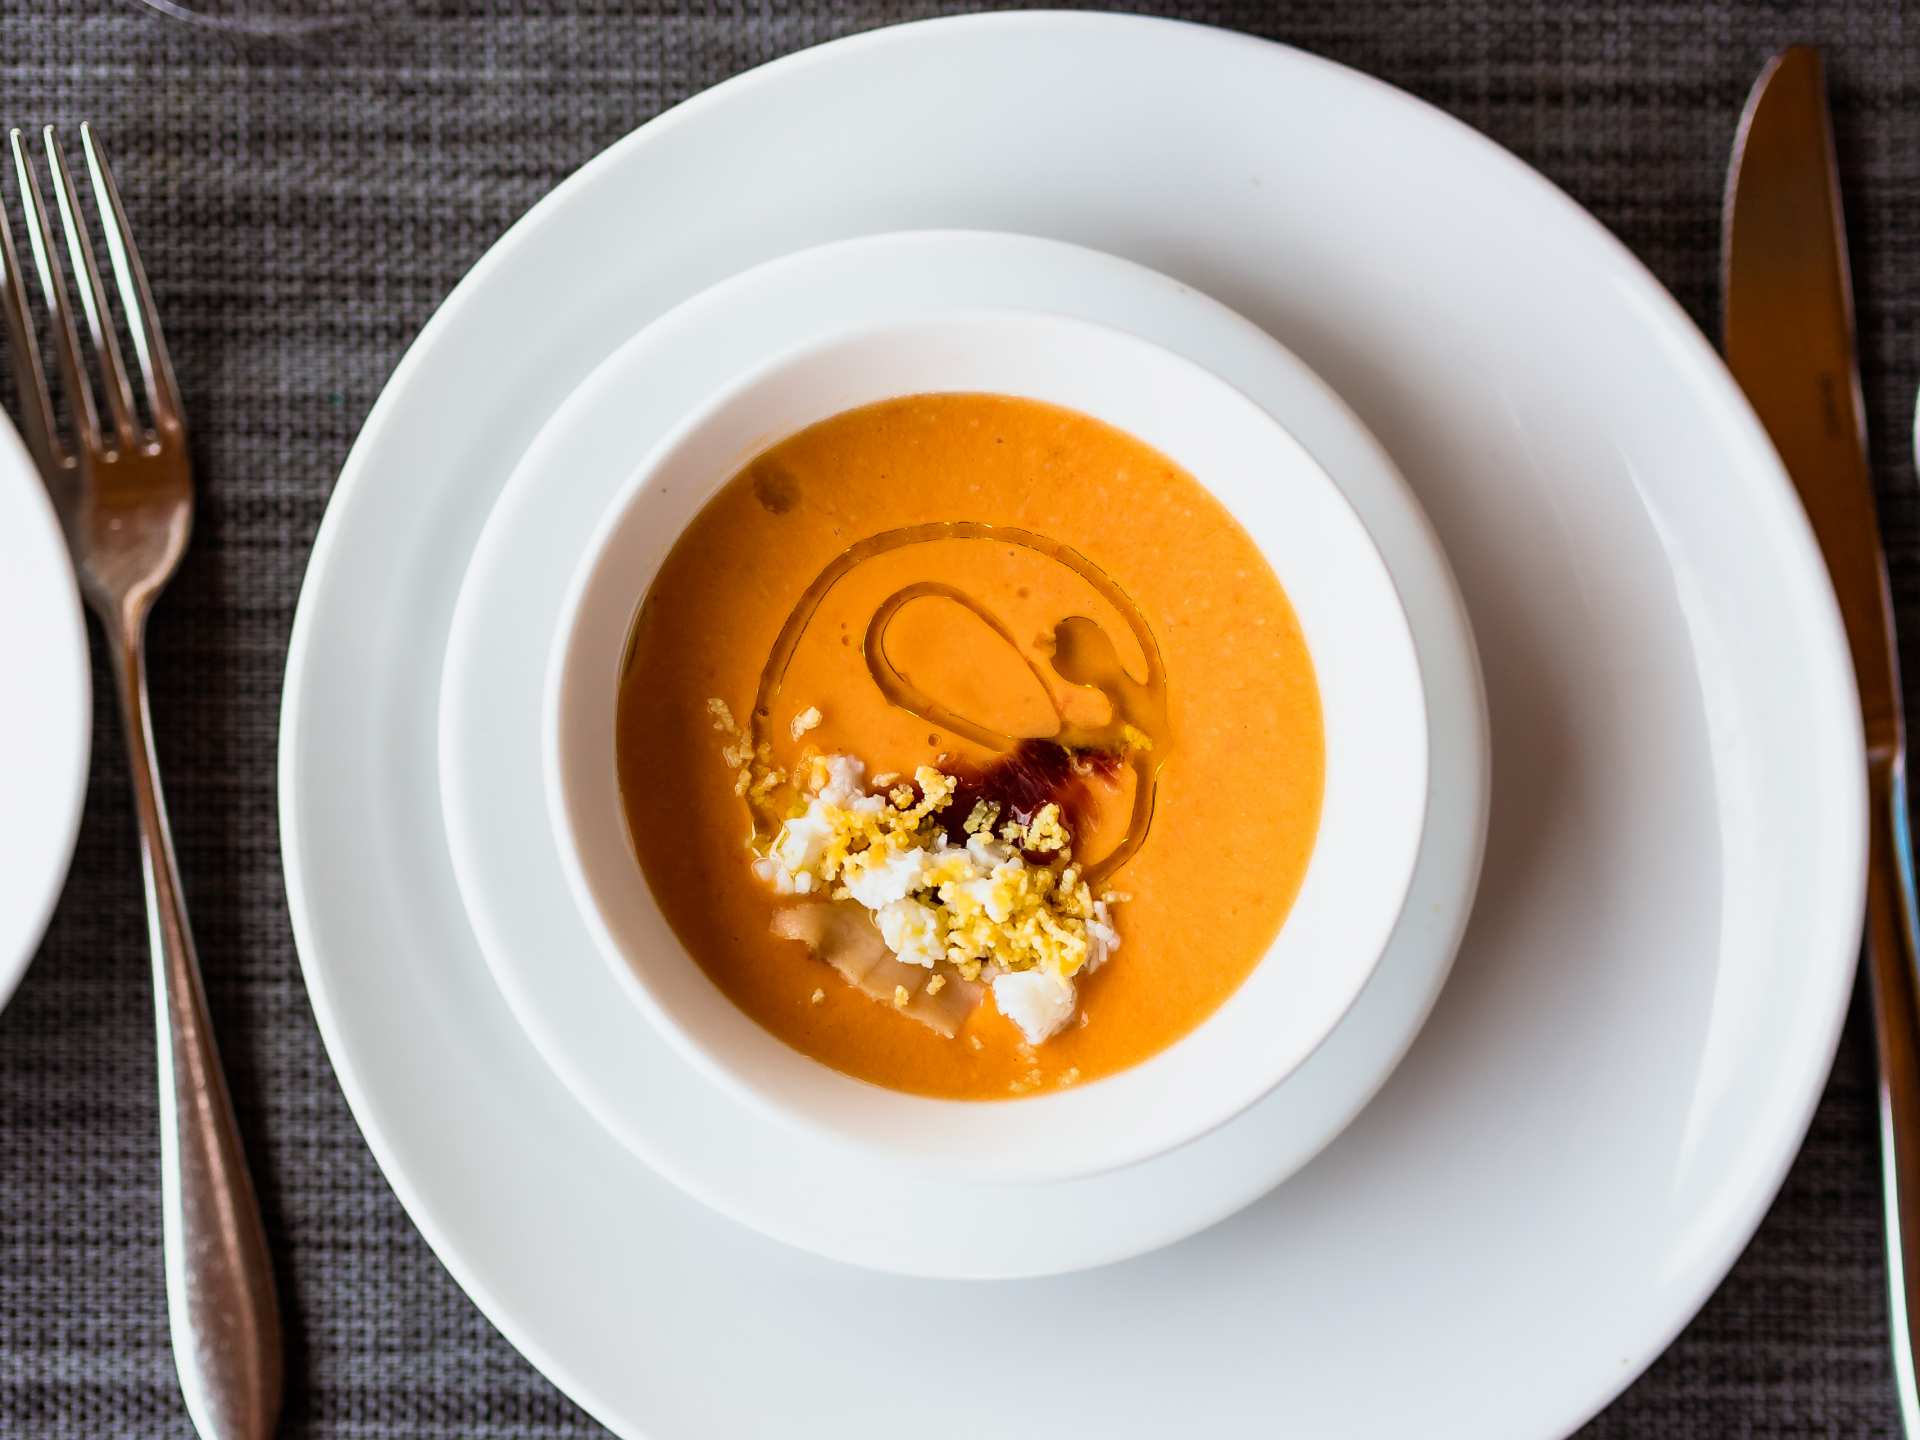 Best wineries and things to do in Osoyoos and Oliver B.C. | Seasonal soup at Miradoro Restaurant